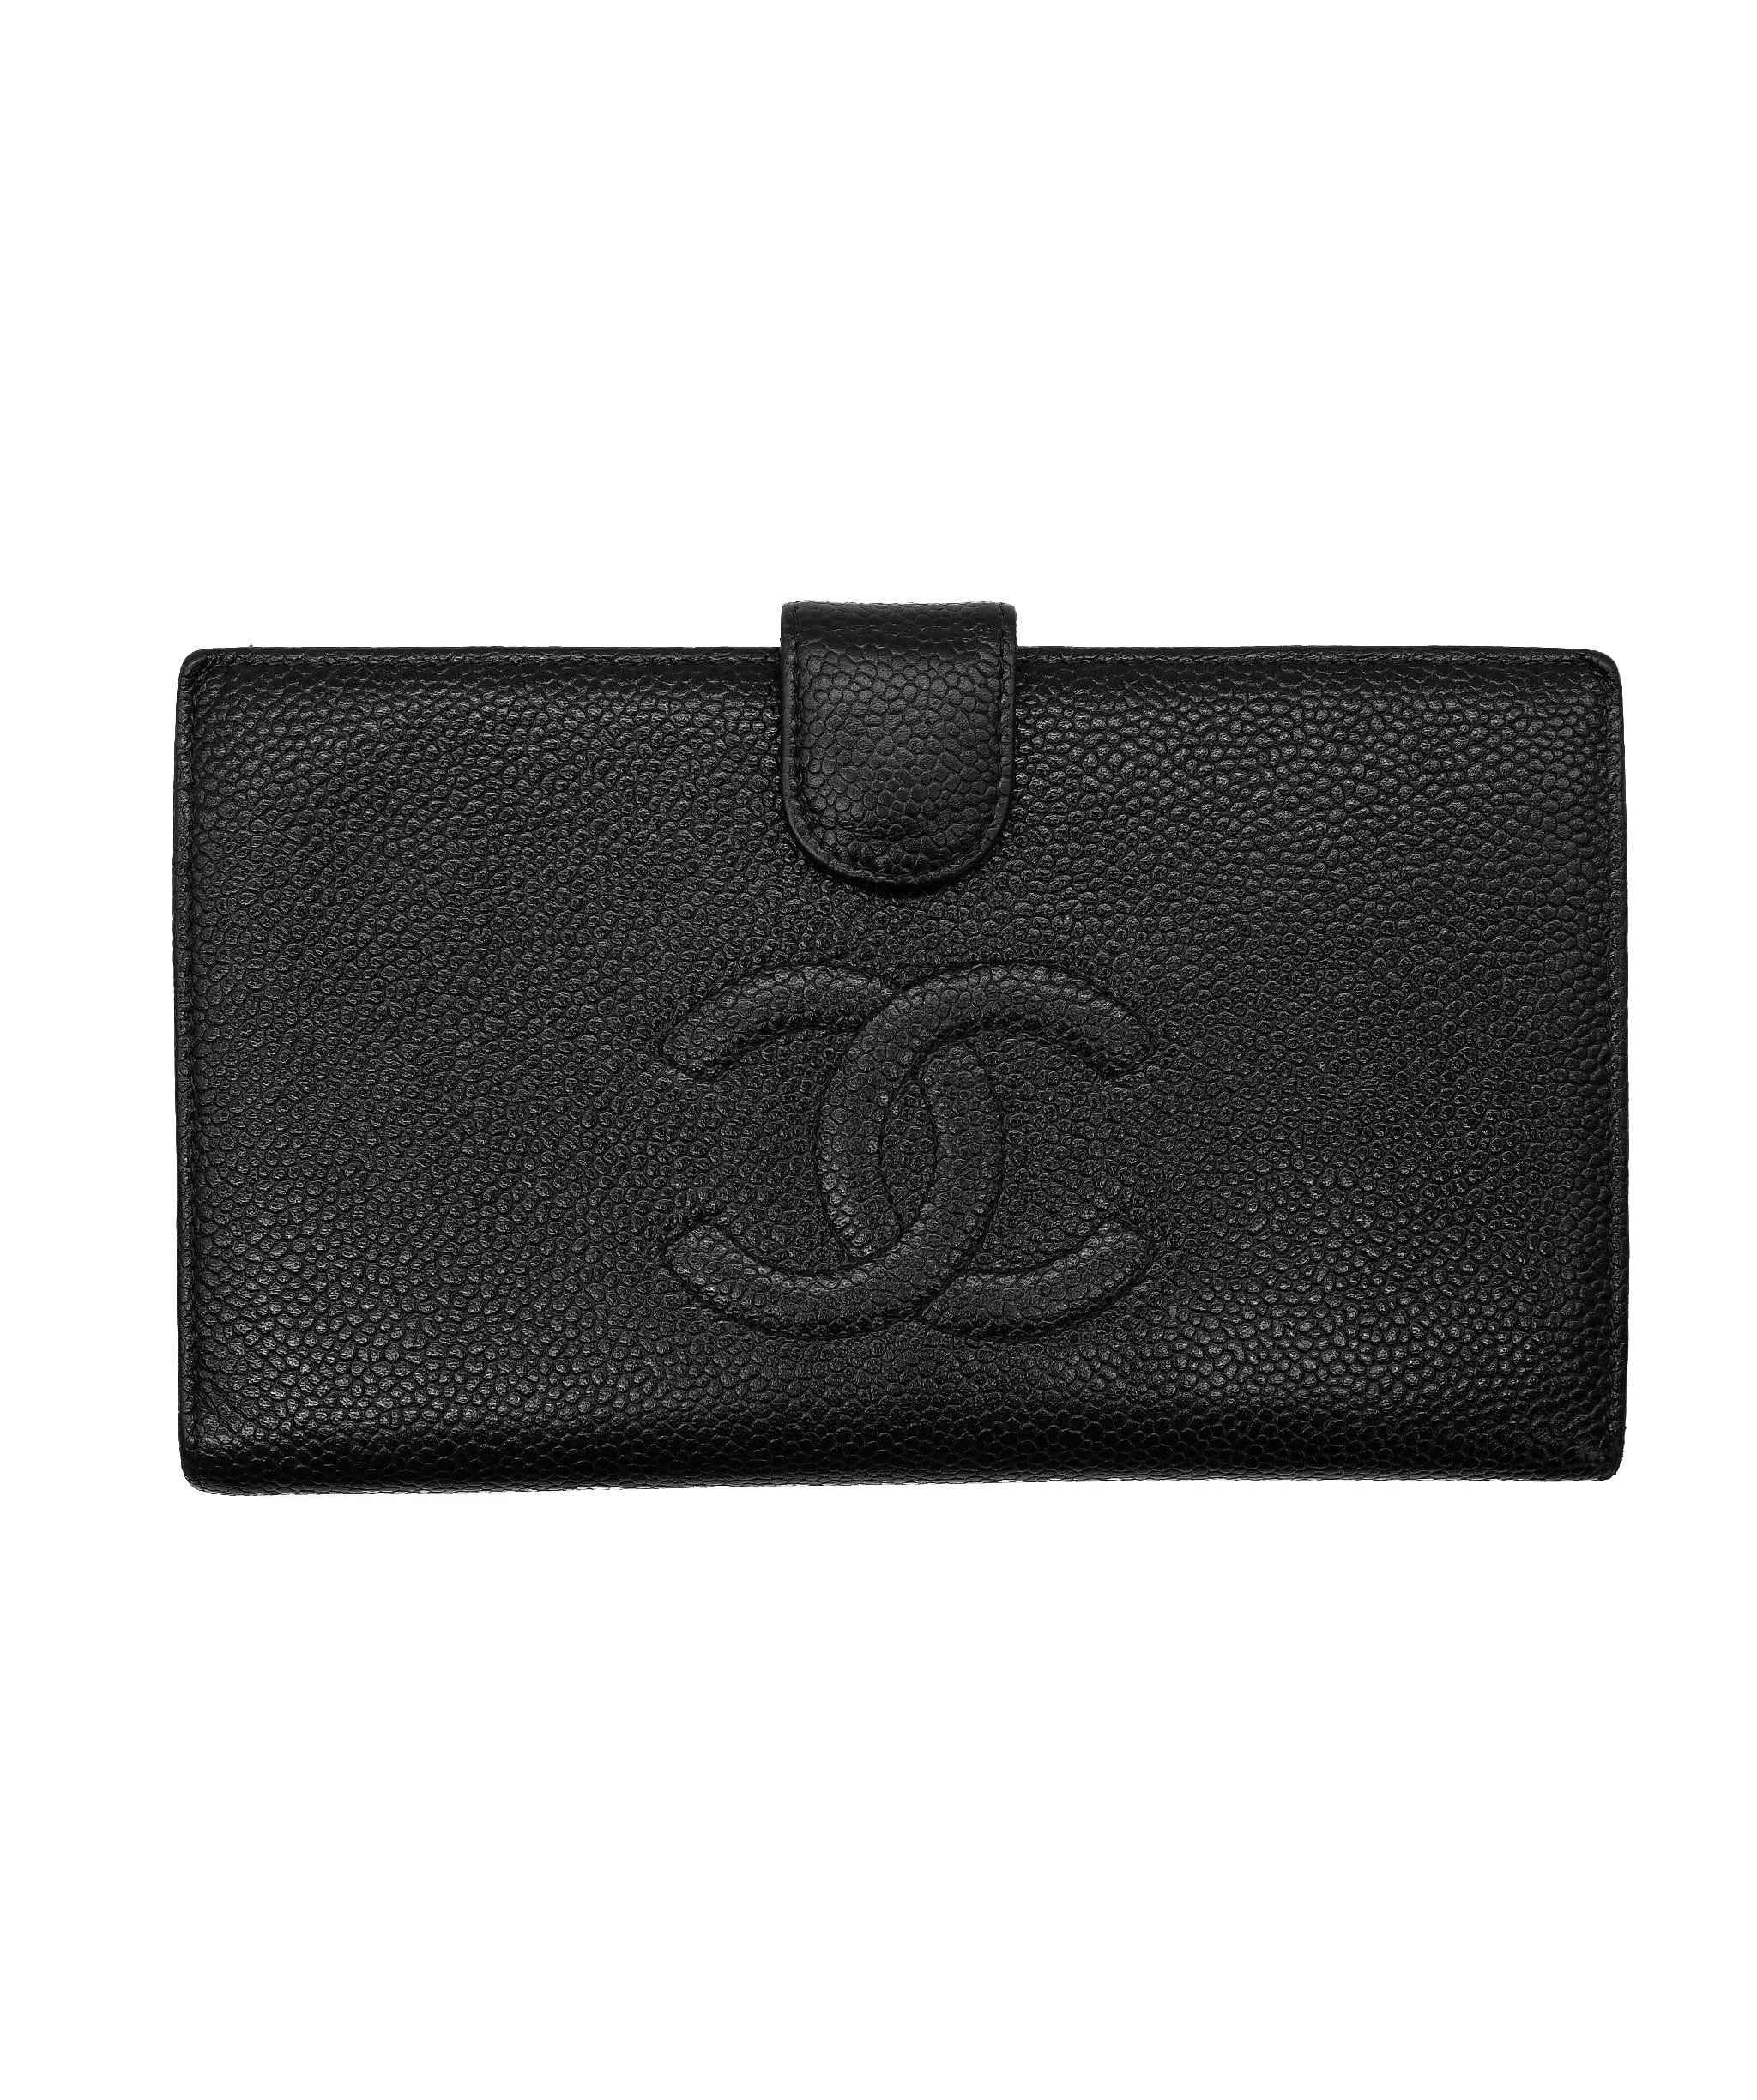 Authentic CHANEL Vintage CC Timeless French Long Wallet Purse Caviar Black  🌸🌸